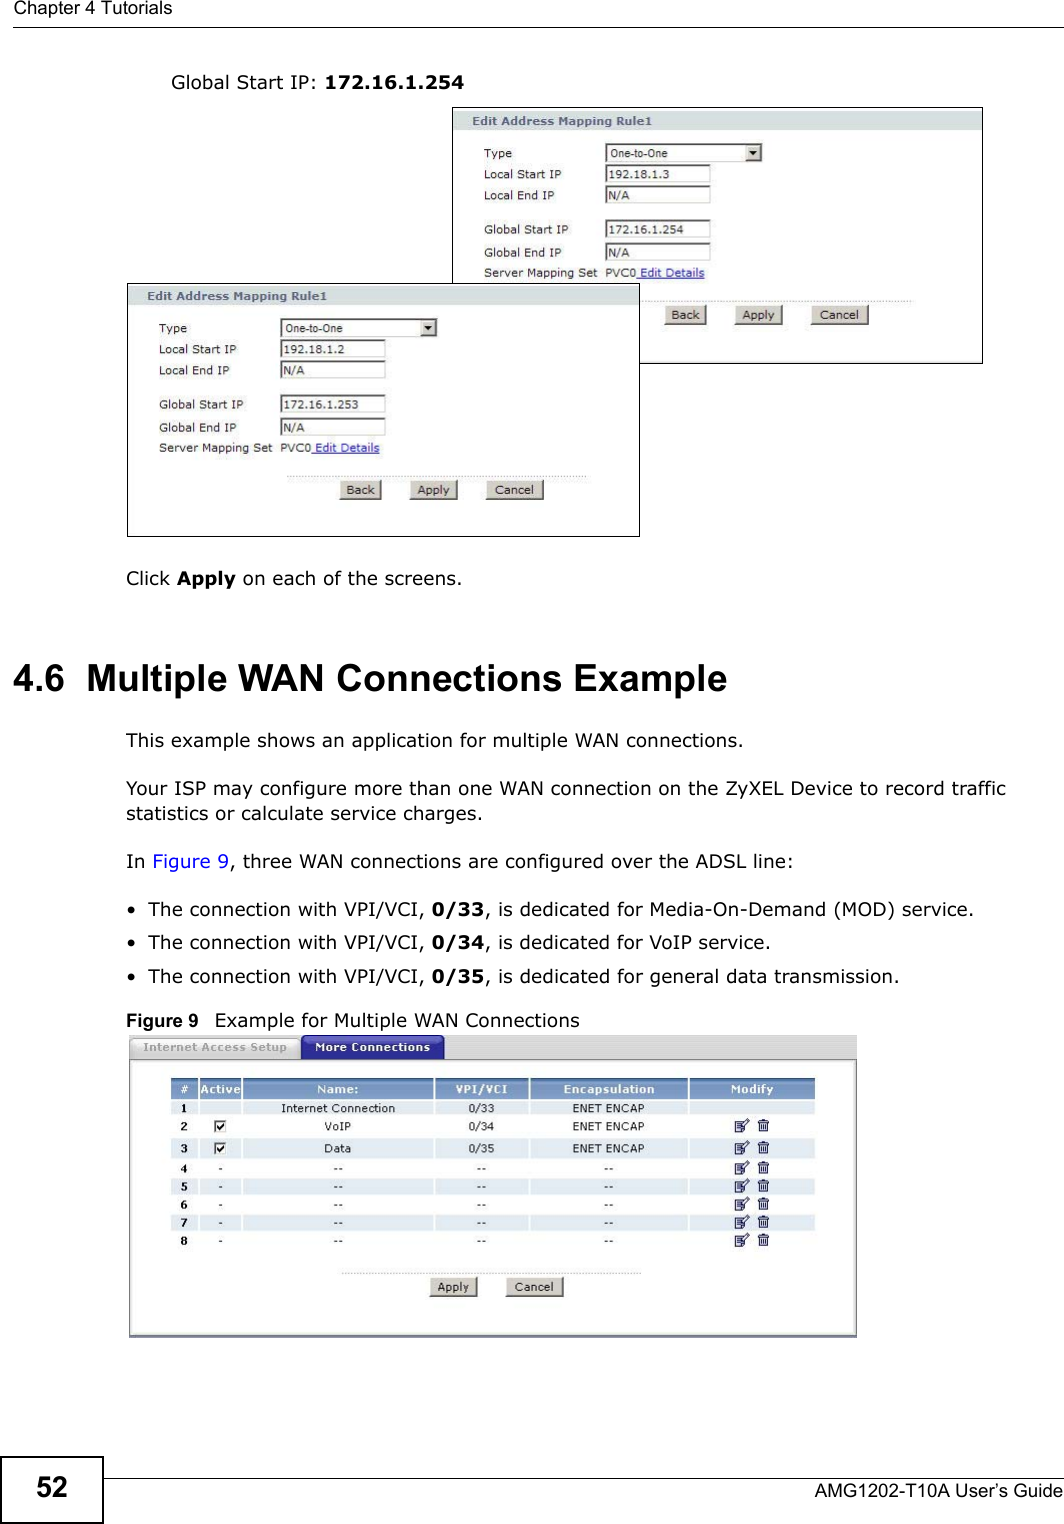 Chapter 4 TutorialsAMG1202-T10A User’s Guide52Global Start IP: 172.16.1.254Click Apply on each of the screens.4.6  Multiple WAN Connections ExampleThis example shows an application for multiple WAN connections.Your ISP may configure more than one WAN connection on the ZyXEL Device to record traffic statistics or calculate service charges.In Figure 9, three WAN connections are configured over the ADSL line:• The connection with VPI/VCI, 0/33, is dedicated for Media-On-Demand (MOD) service.• The connection with VPI/VCI, 0/34, is dedicated for VoIP service.• The connection with VPI/VCI, 0/35, is dedicated for general data transmission.Figure 9   Example for Multiple WAN Connections